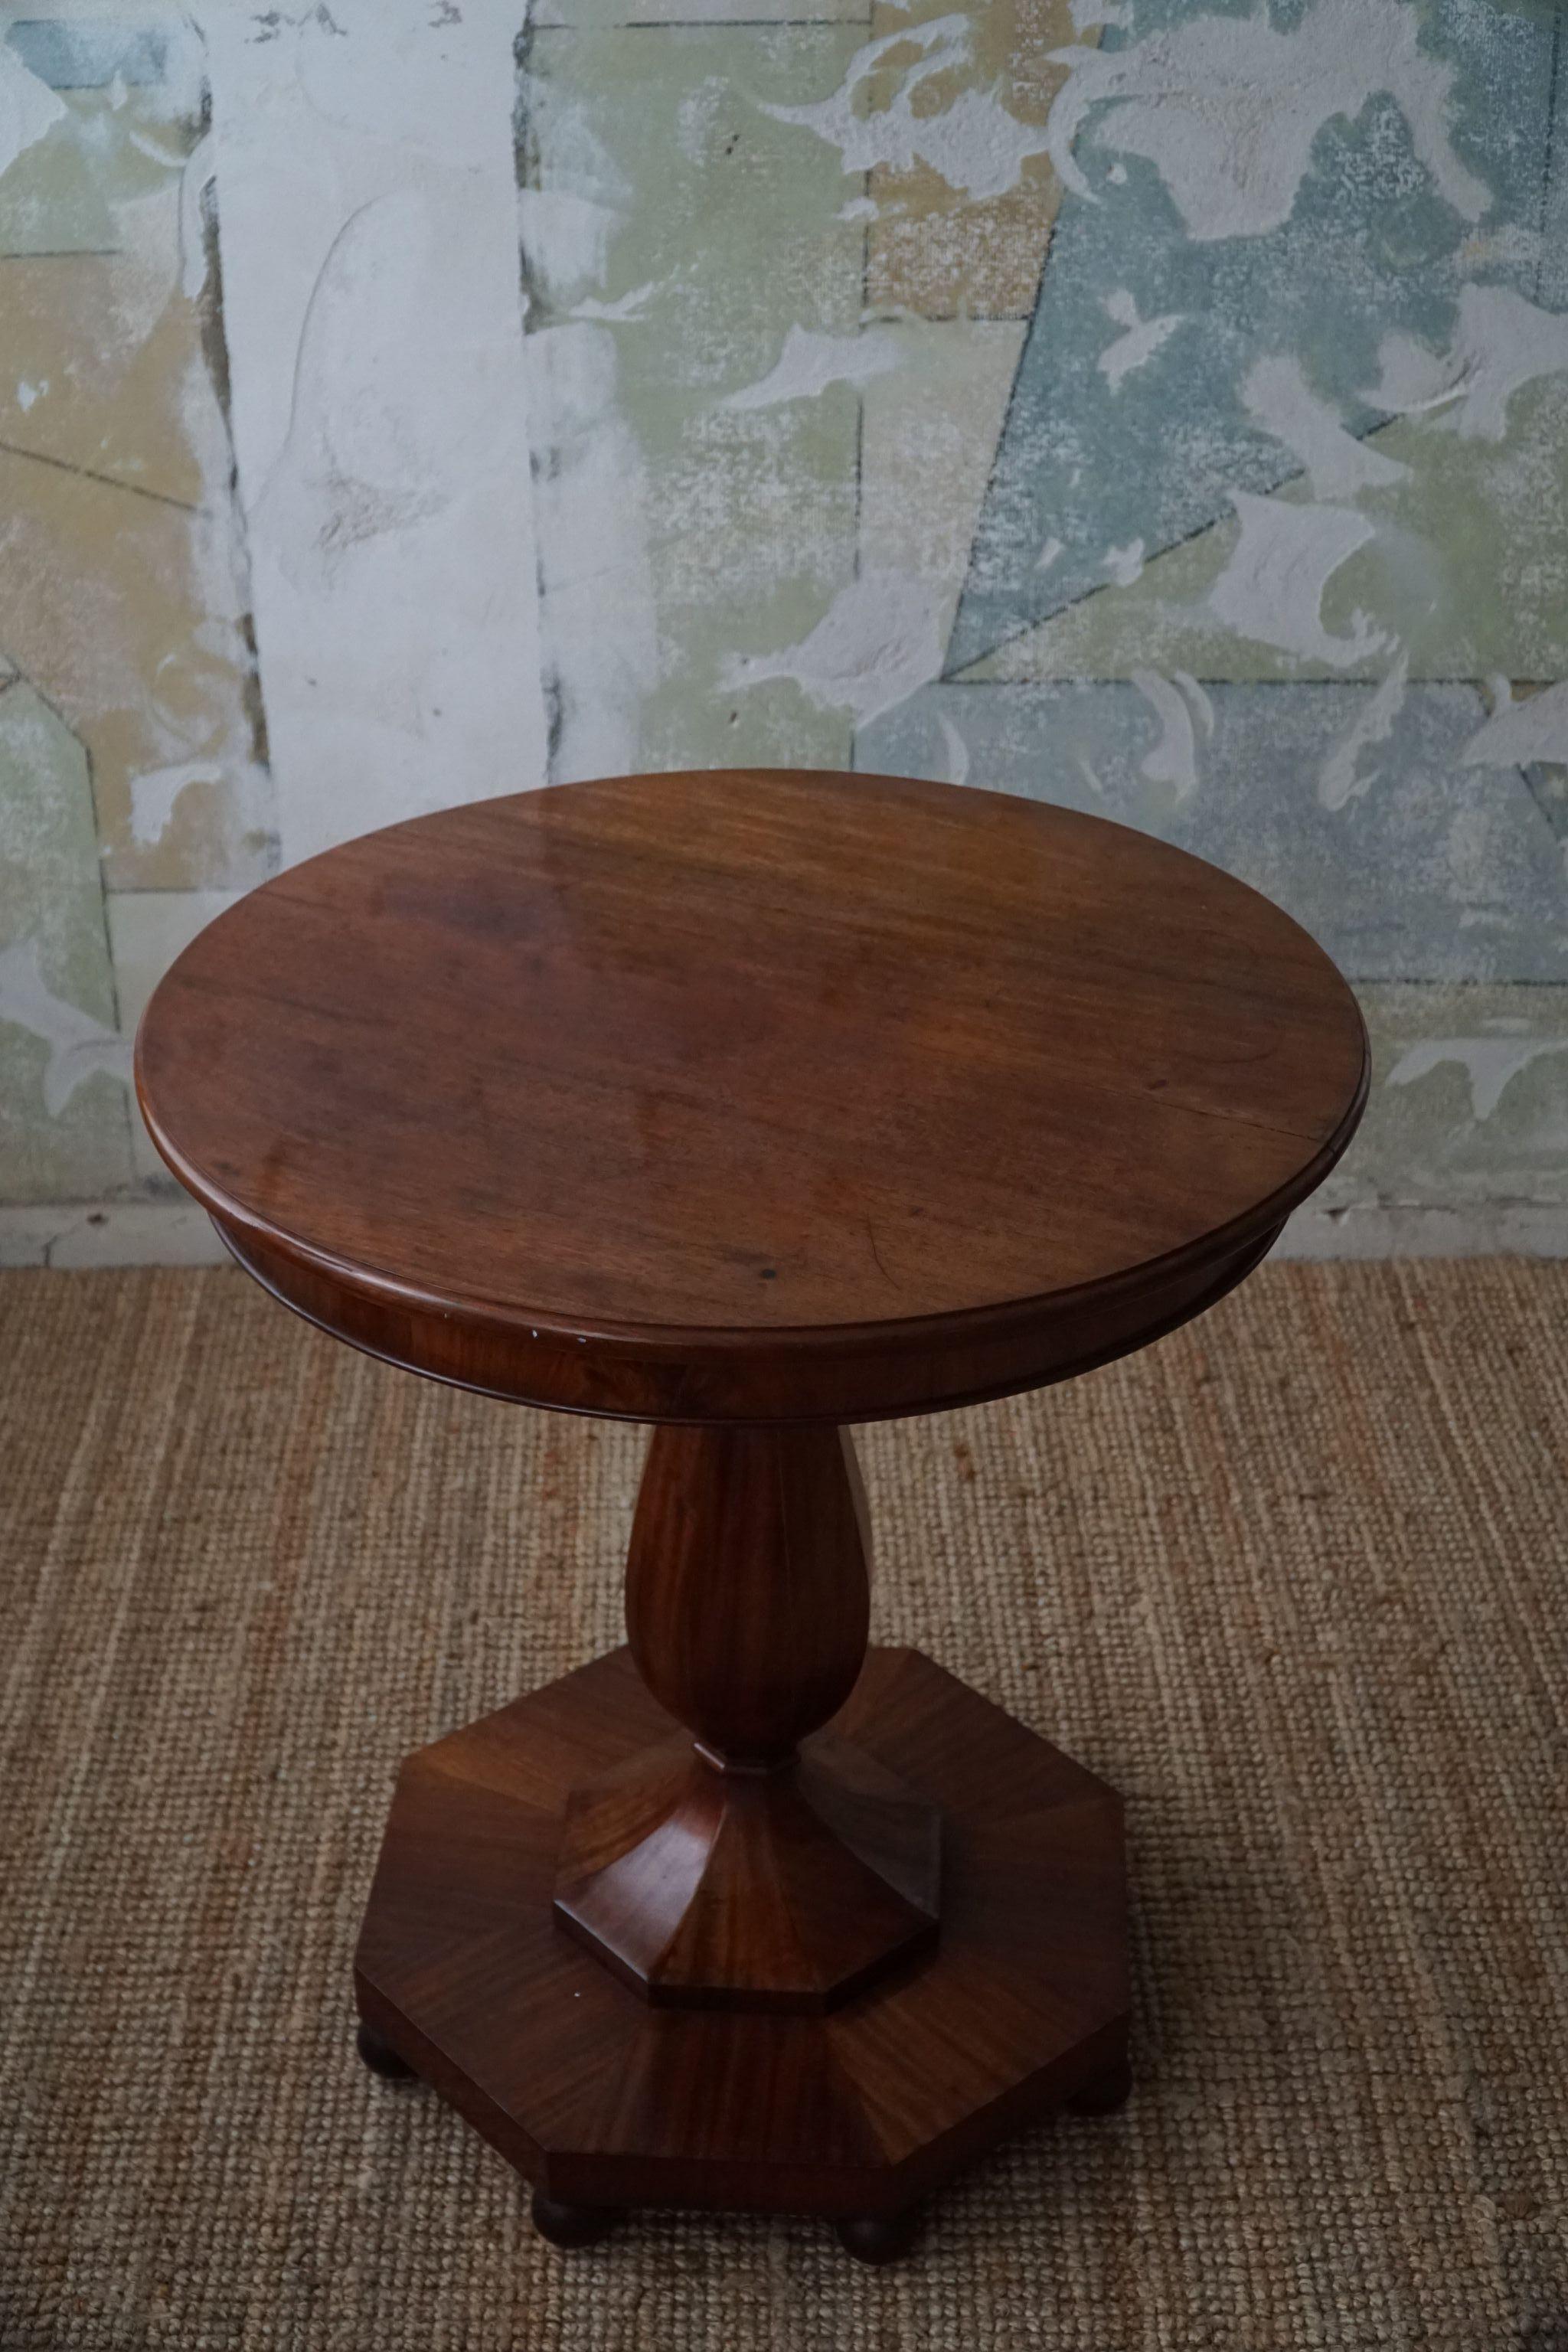 Art Deco, Round Pedestal / Side Table in Walnut, By a Danish Cabinetmaker, 1940s For Sale 13